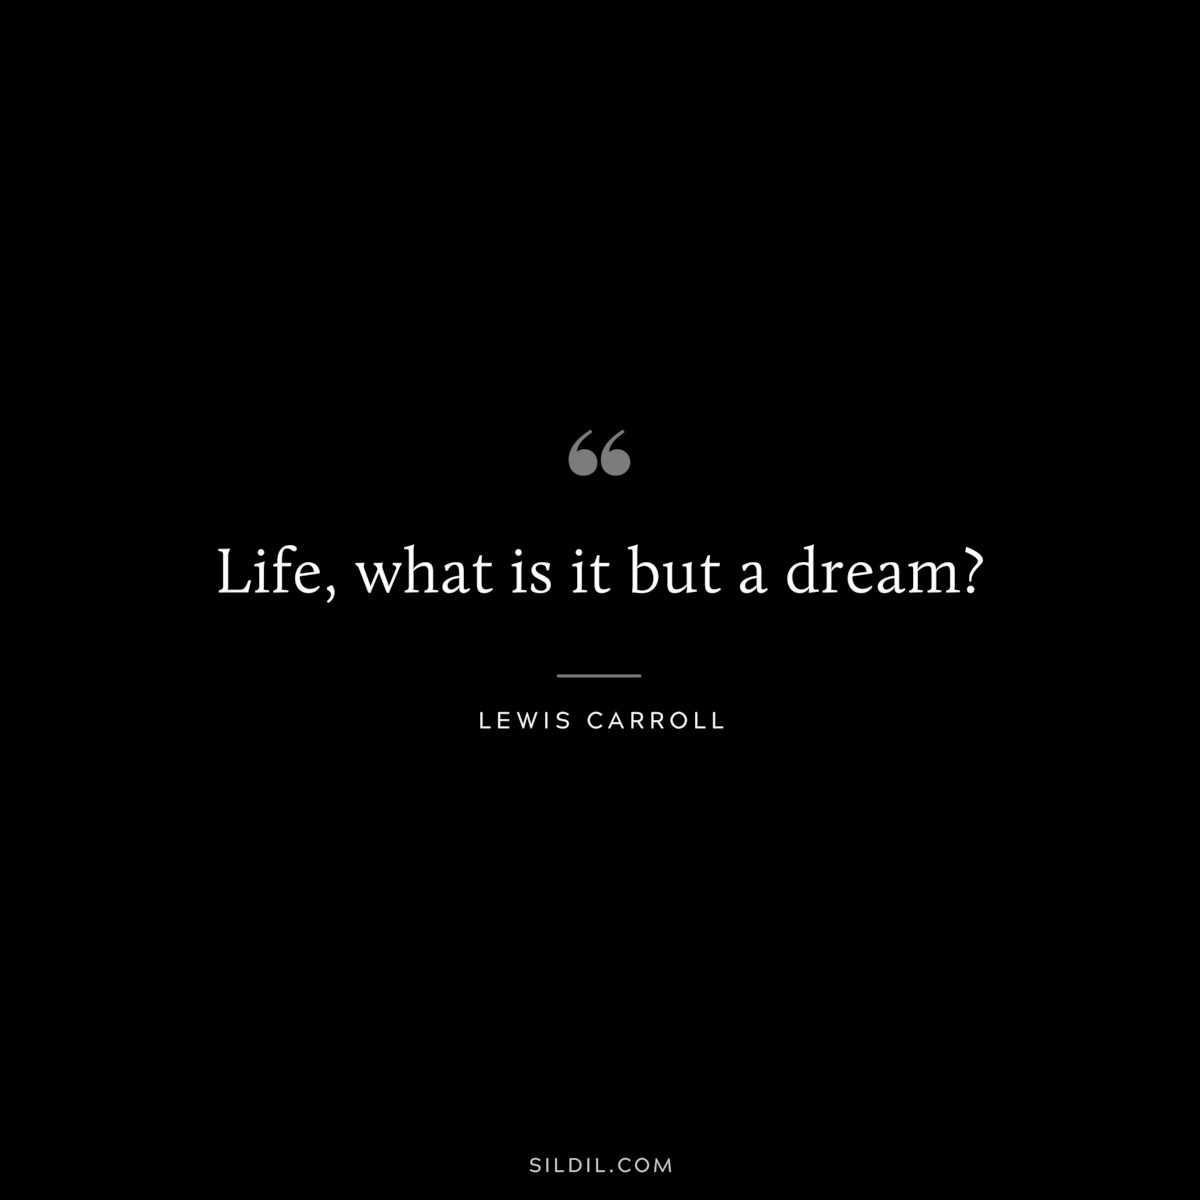 Life, what is it but a dream?